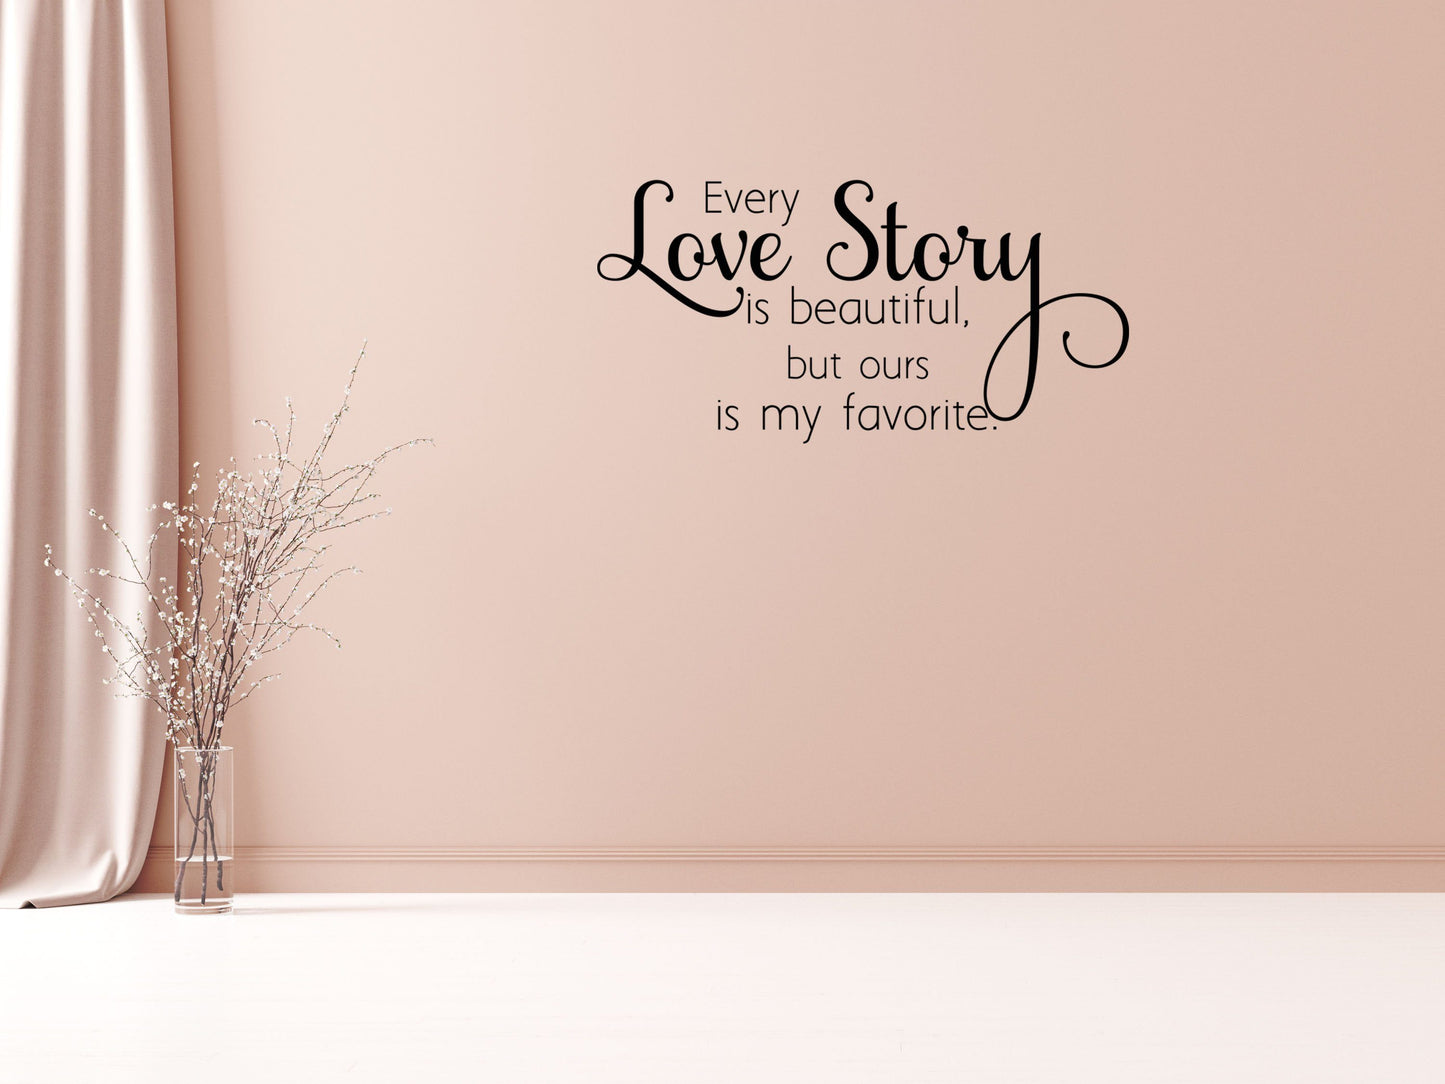 Every Love Story - Inspirational Wall Decals Vinyl Wall Decal Done 